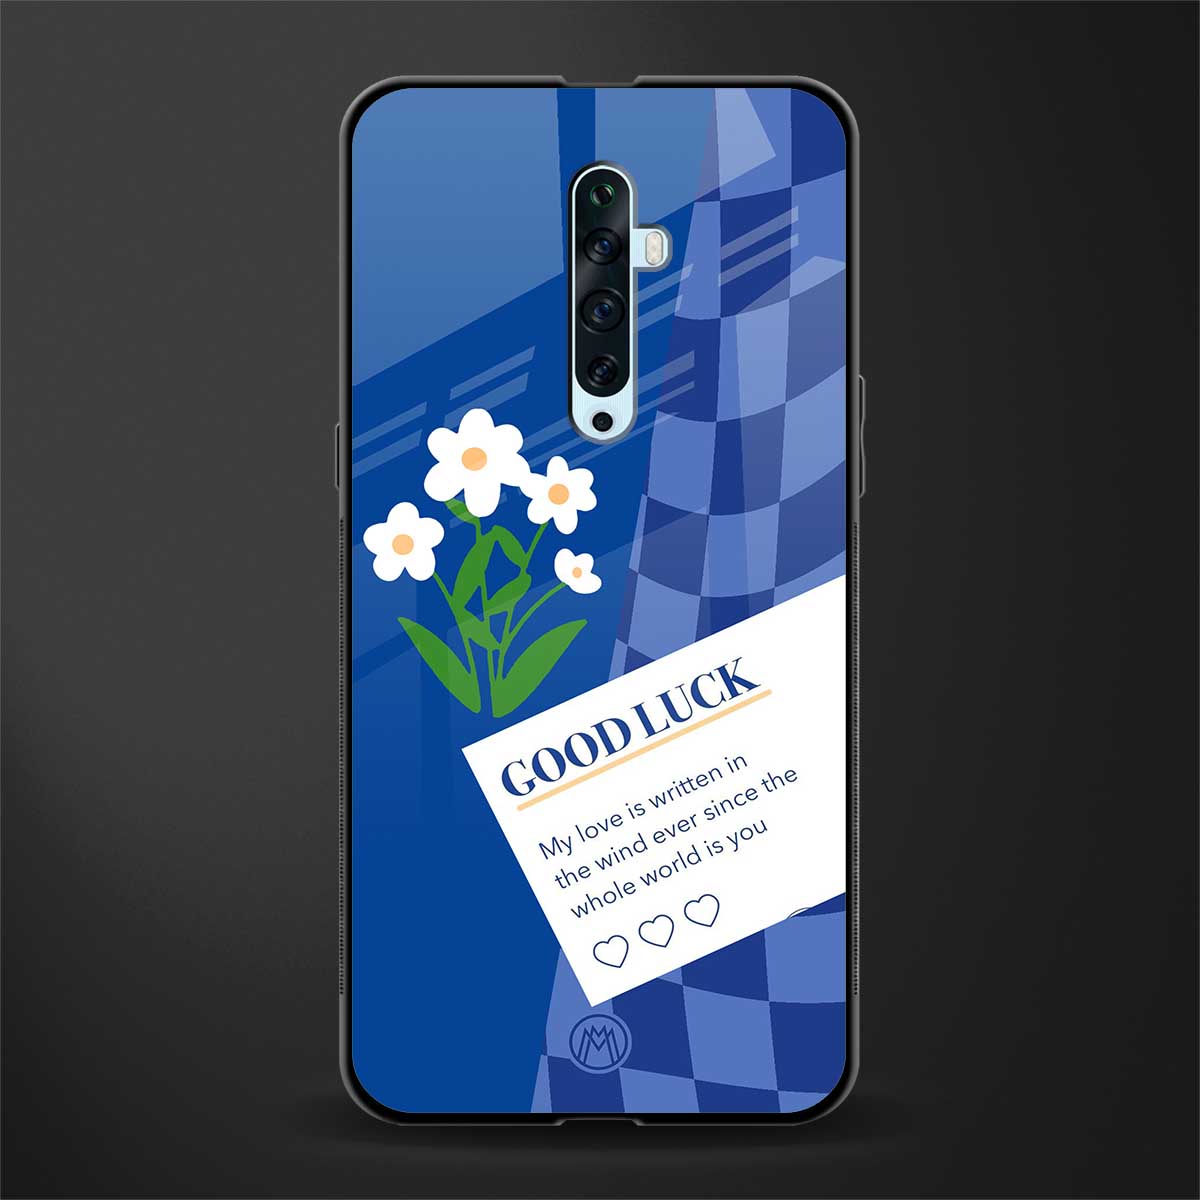 you're my world blue edition glass case for oppo reno 2z image